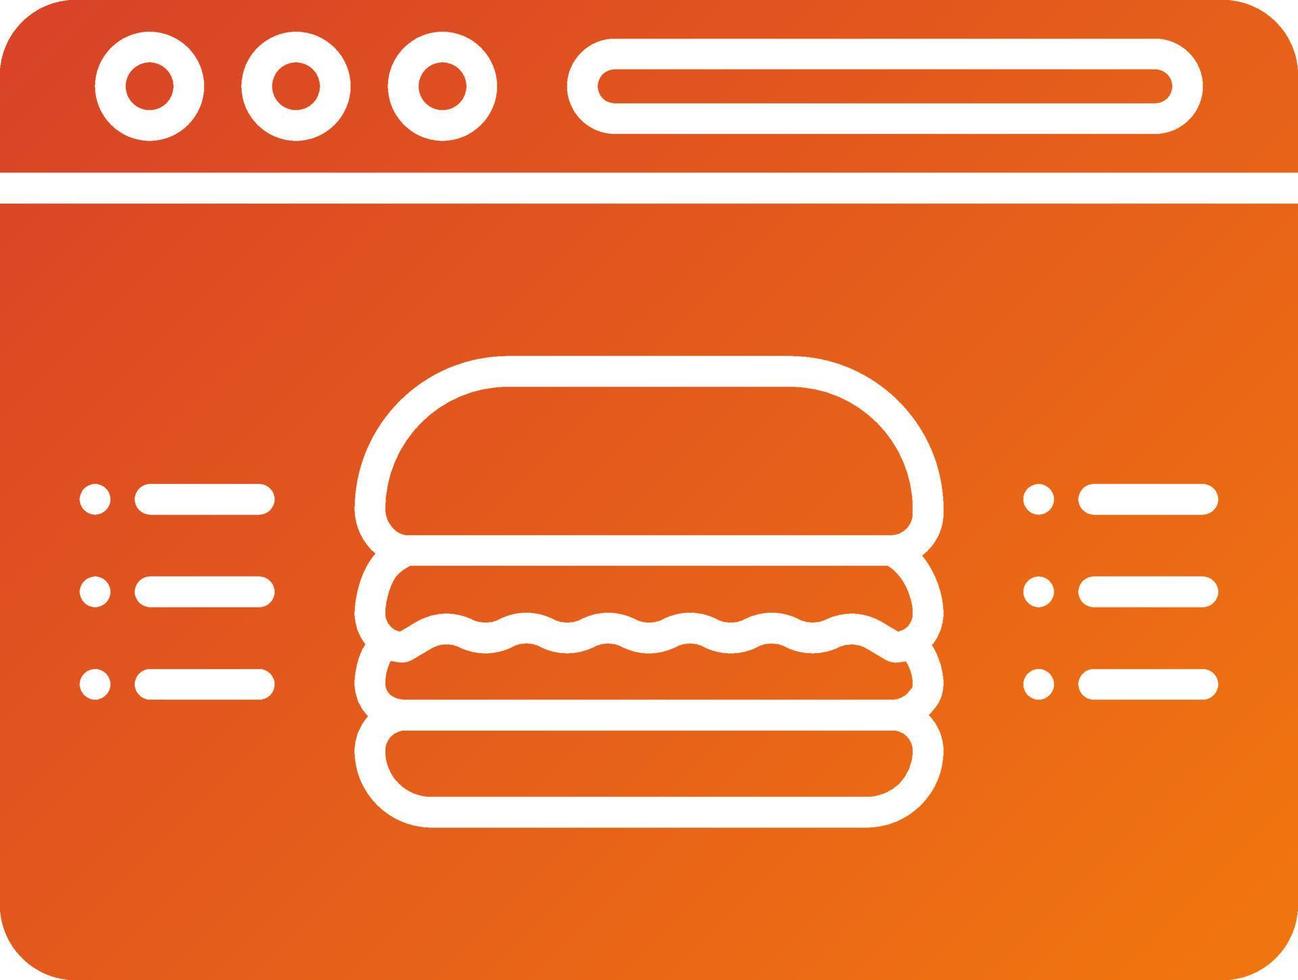 Food Blog Icon Style vector